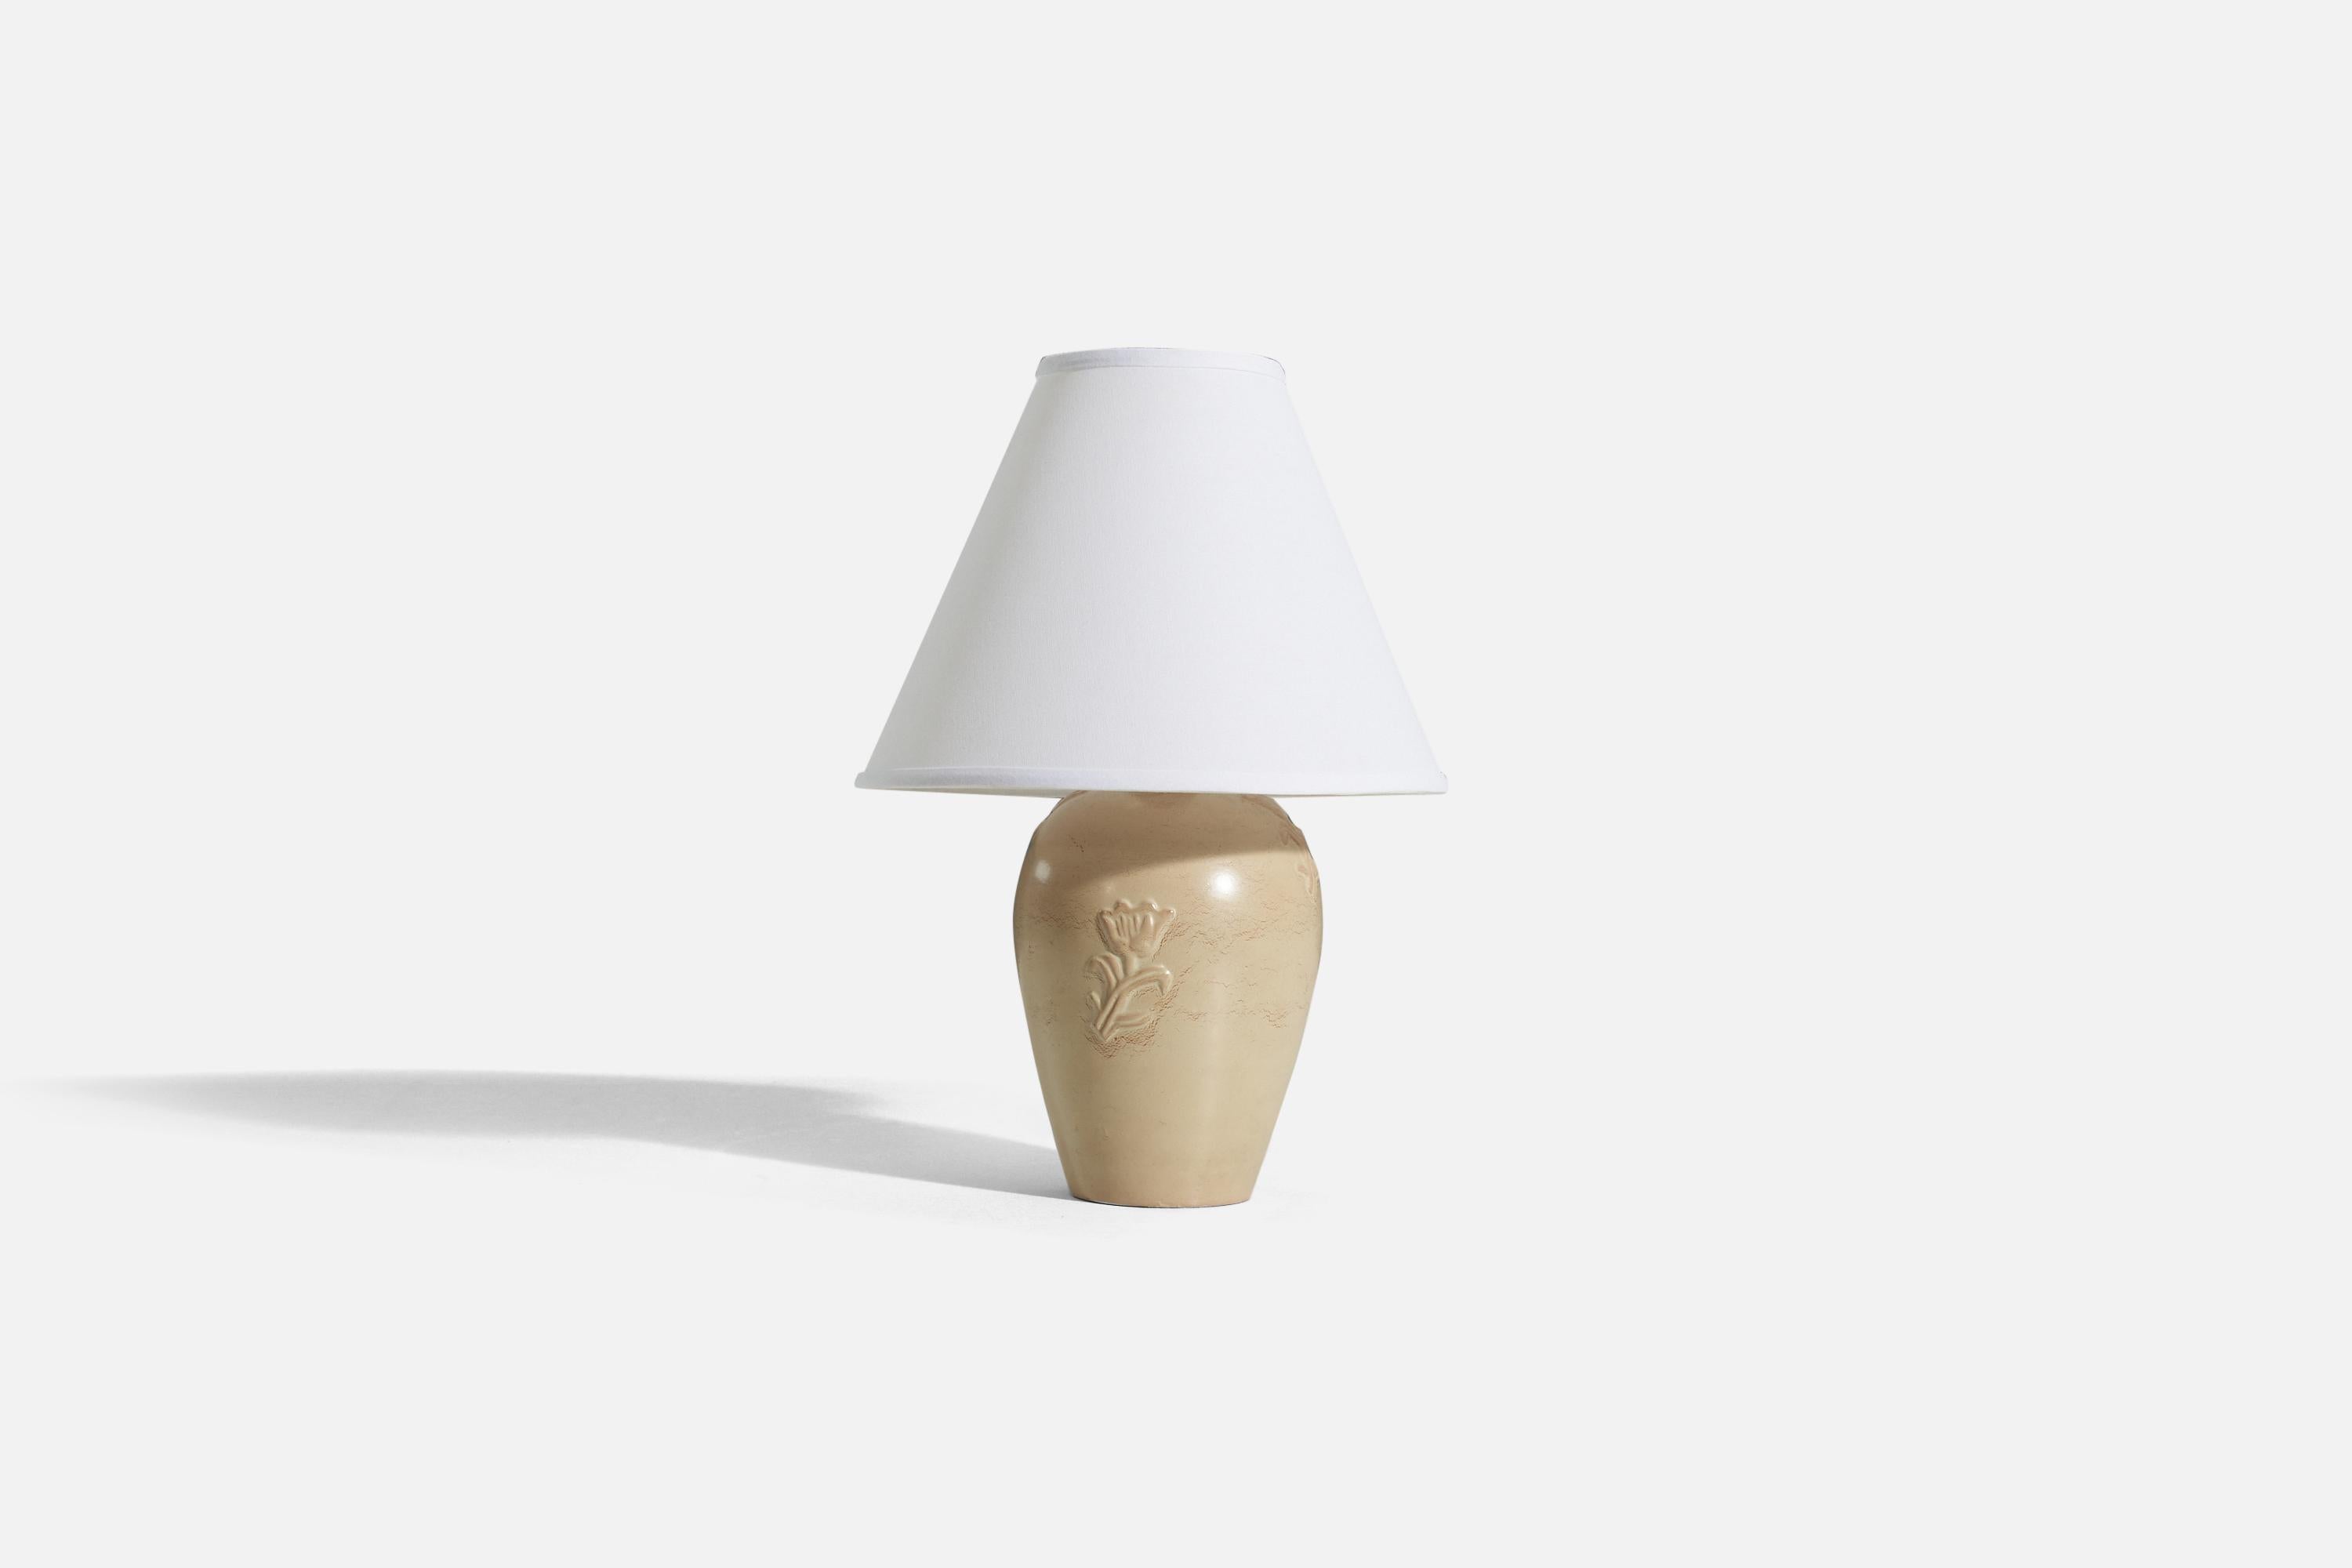 A cream-glazed earthenware table lamp with flower bas relief decor, designed by Jerk Werkmäster and produced by Nittsjö Ceramics, Sweden, c. 1940s. 

Sold without lampshade. 
Dimensions of Lamp (inches) : 10.25 x 5 x 5 (H x W x D)
Dimensions of